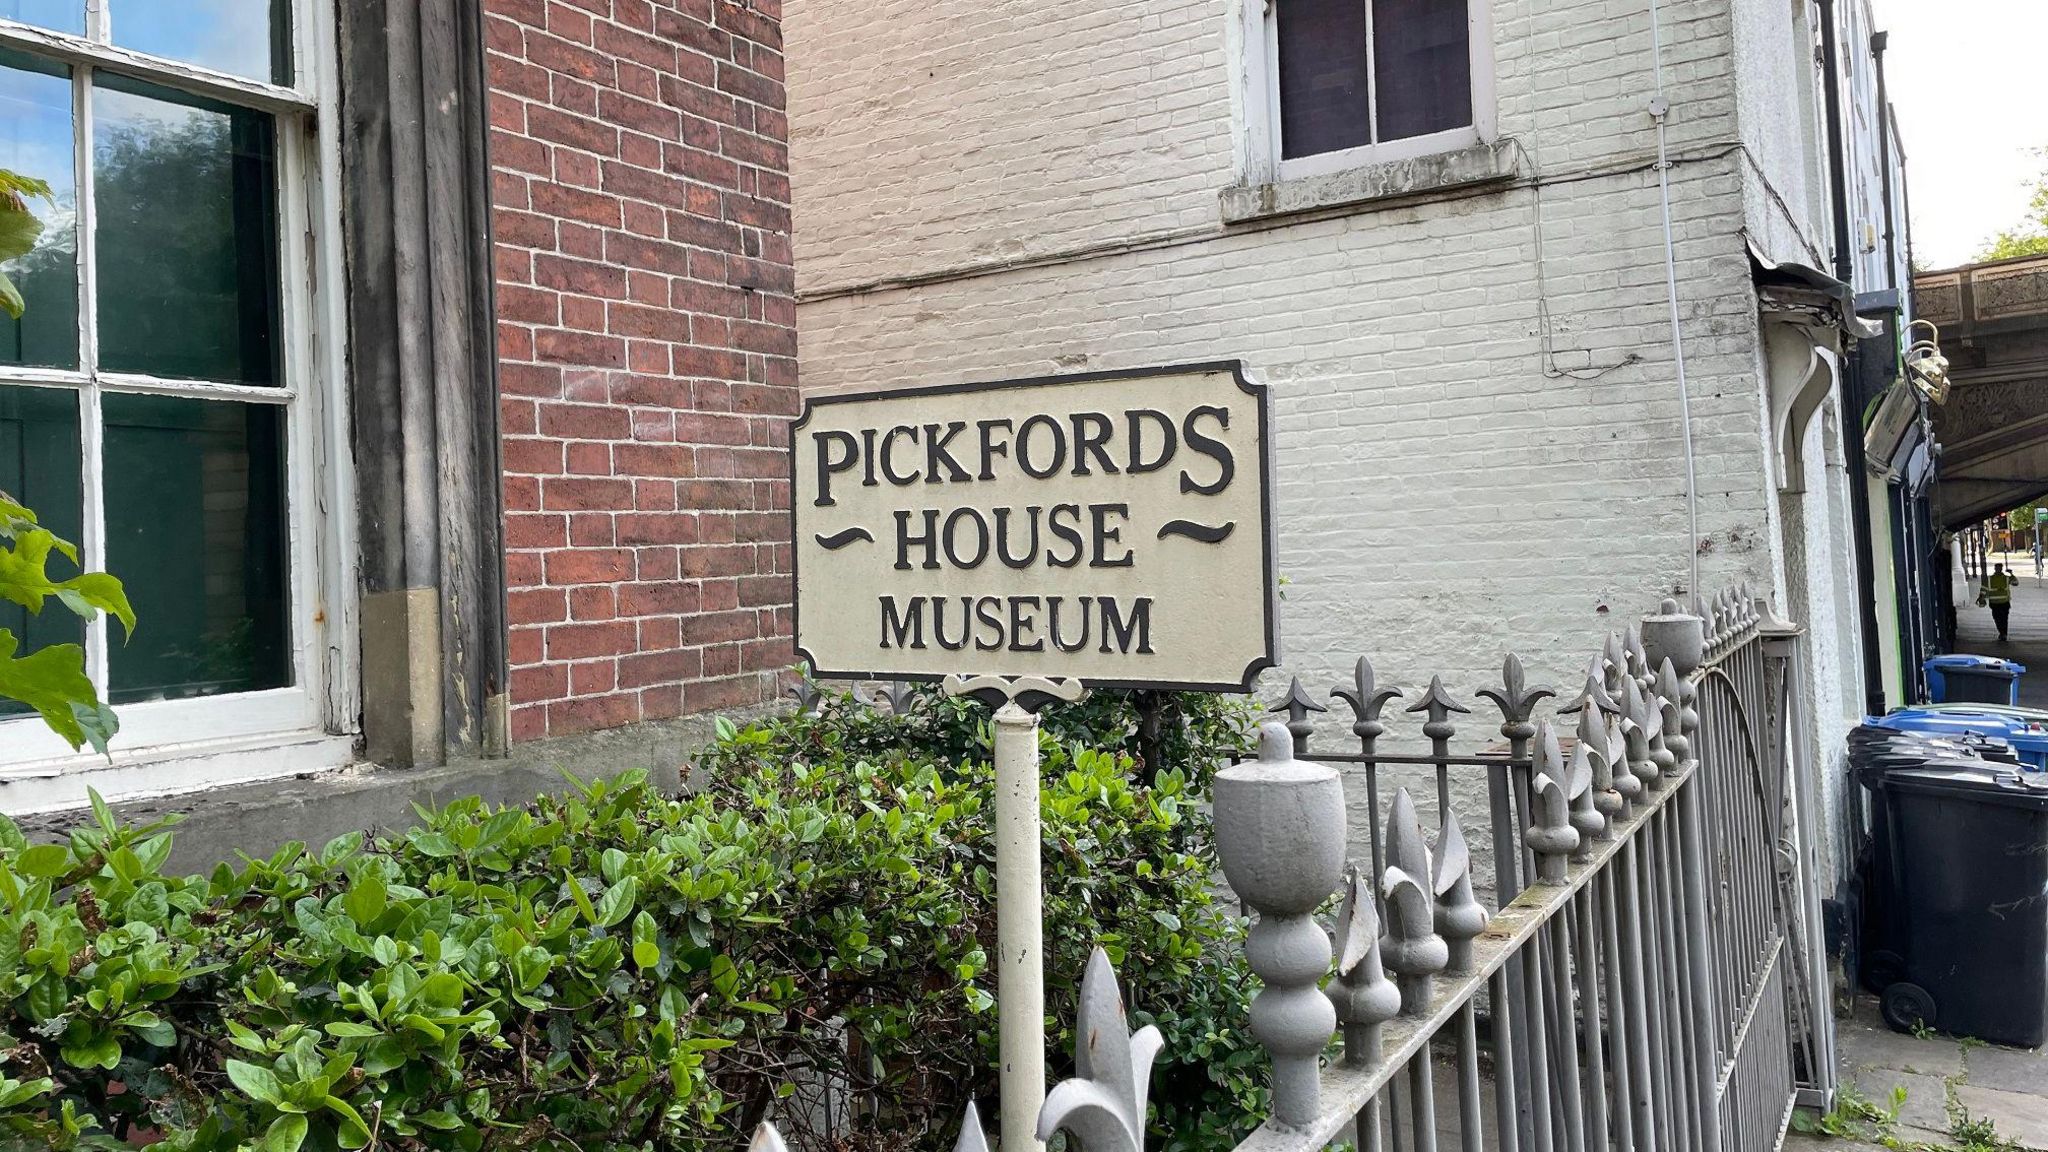 Pickfords House Museum sign outside the building